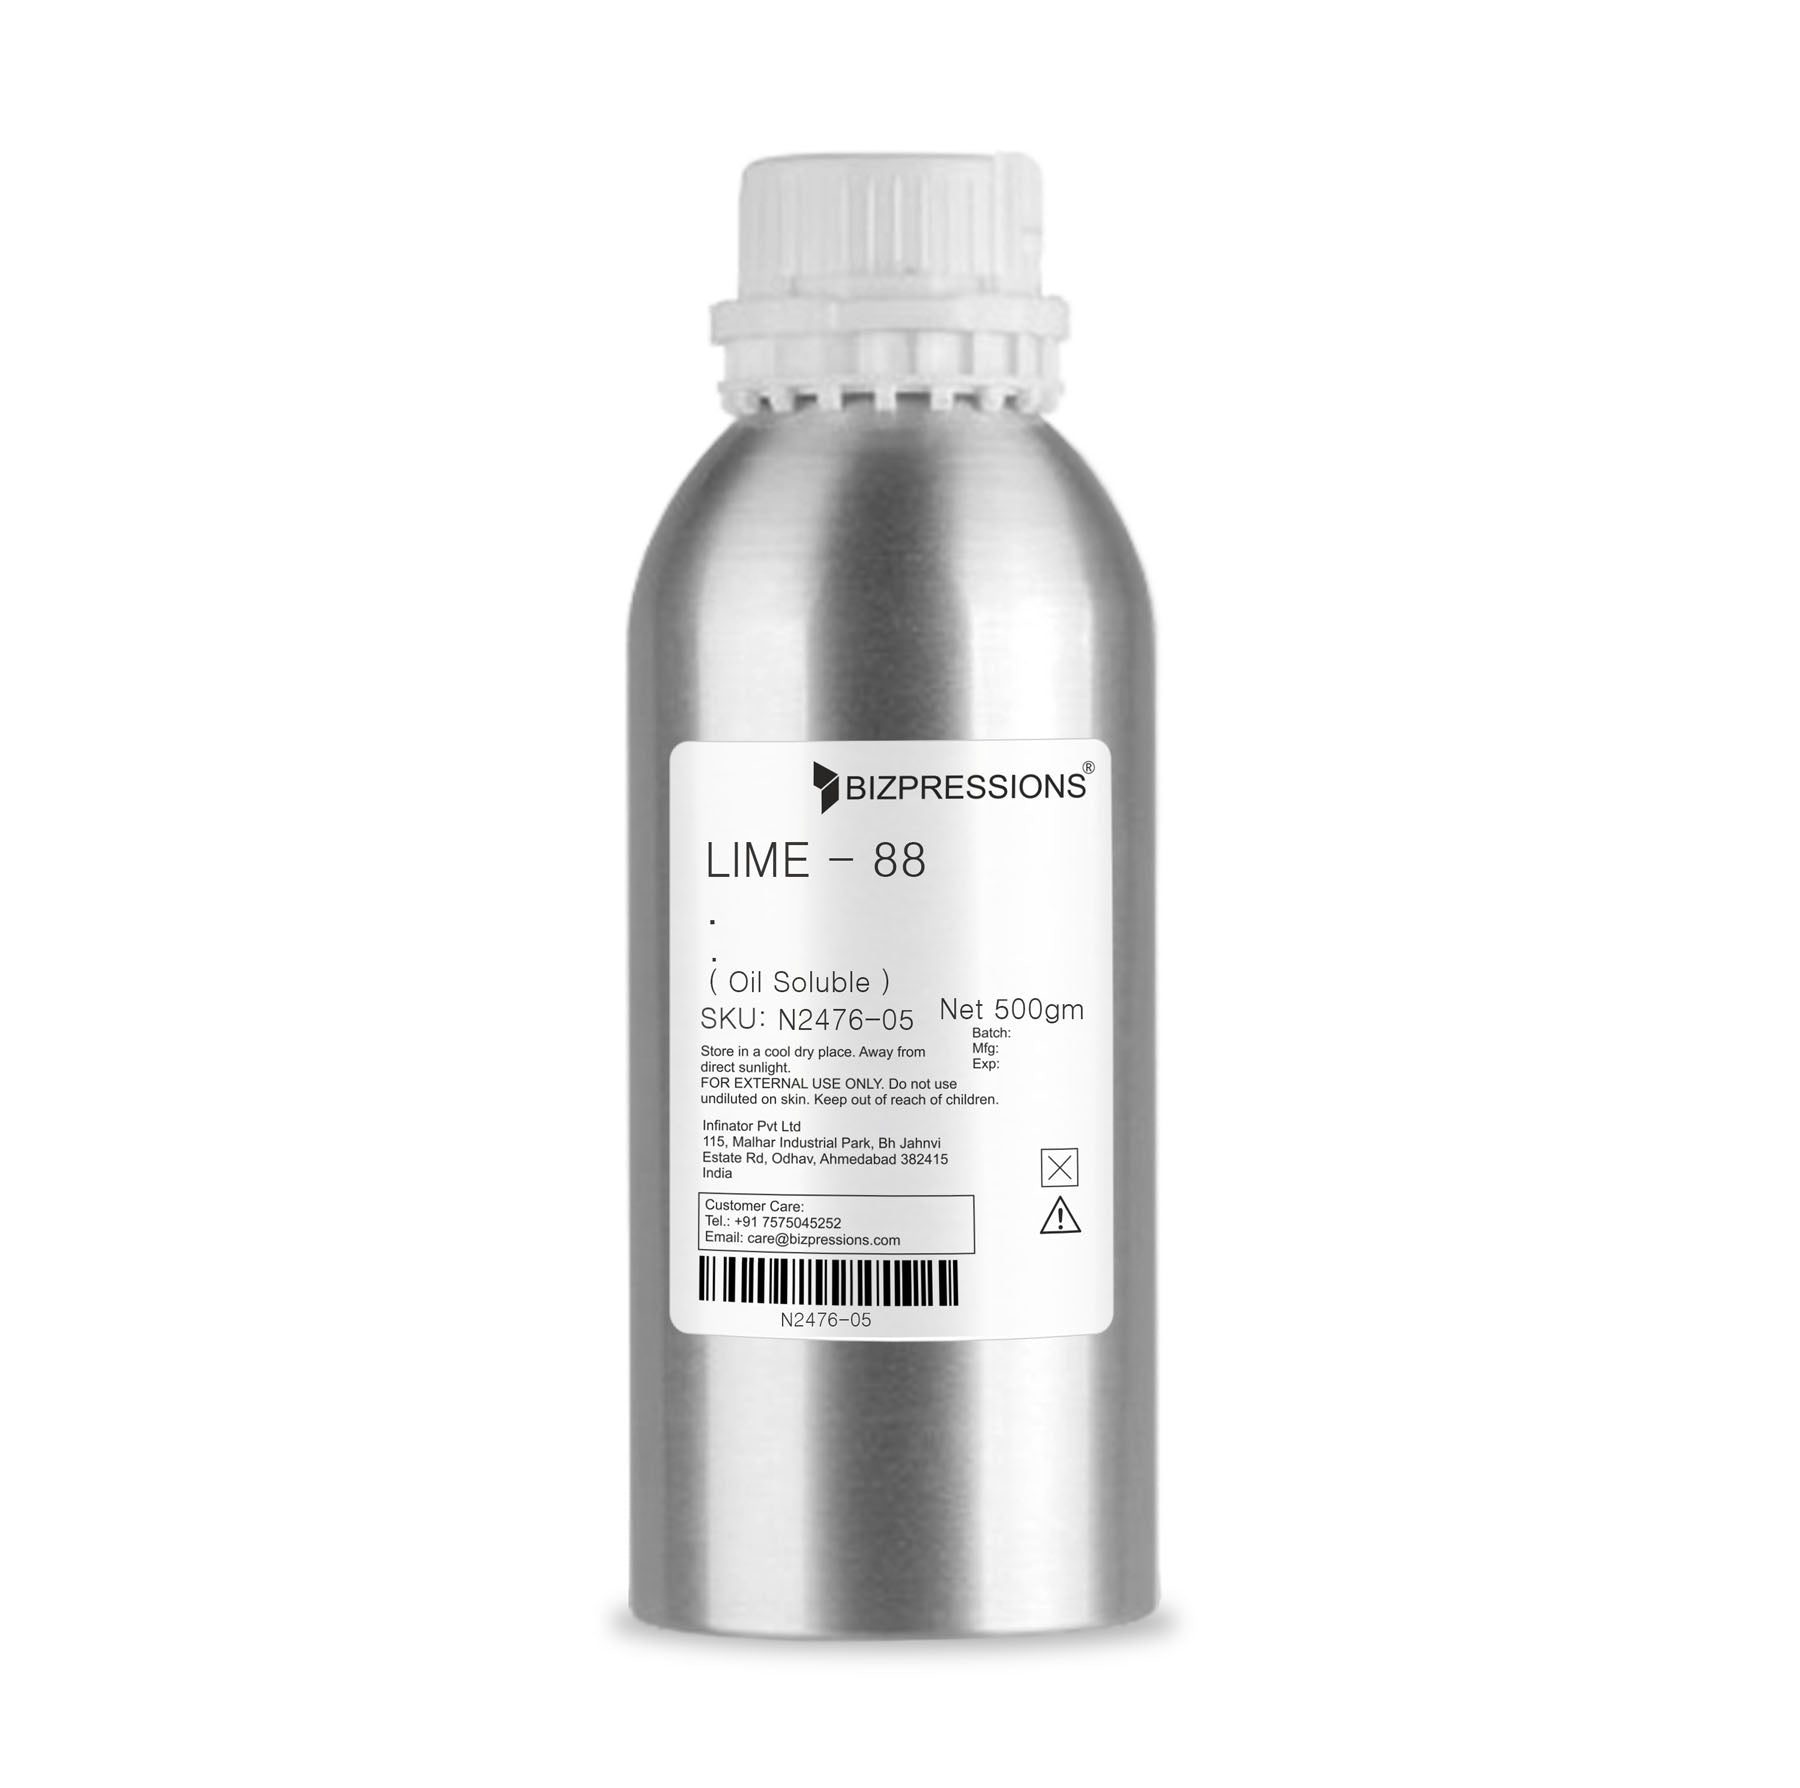 LIME - 88 - Fragrance ( Oil Soluble ) - 500 gm